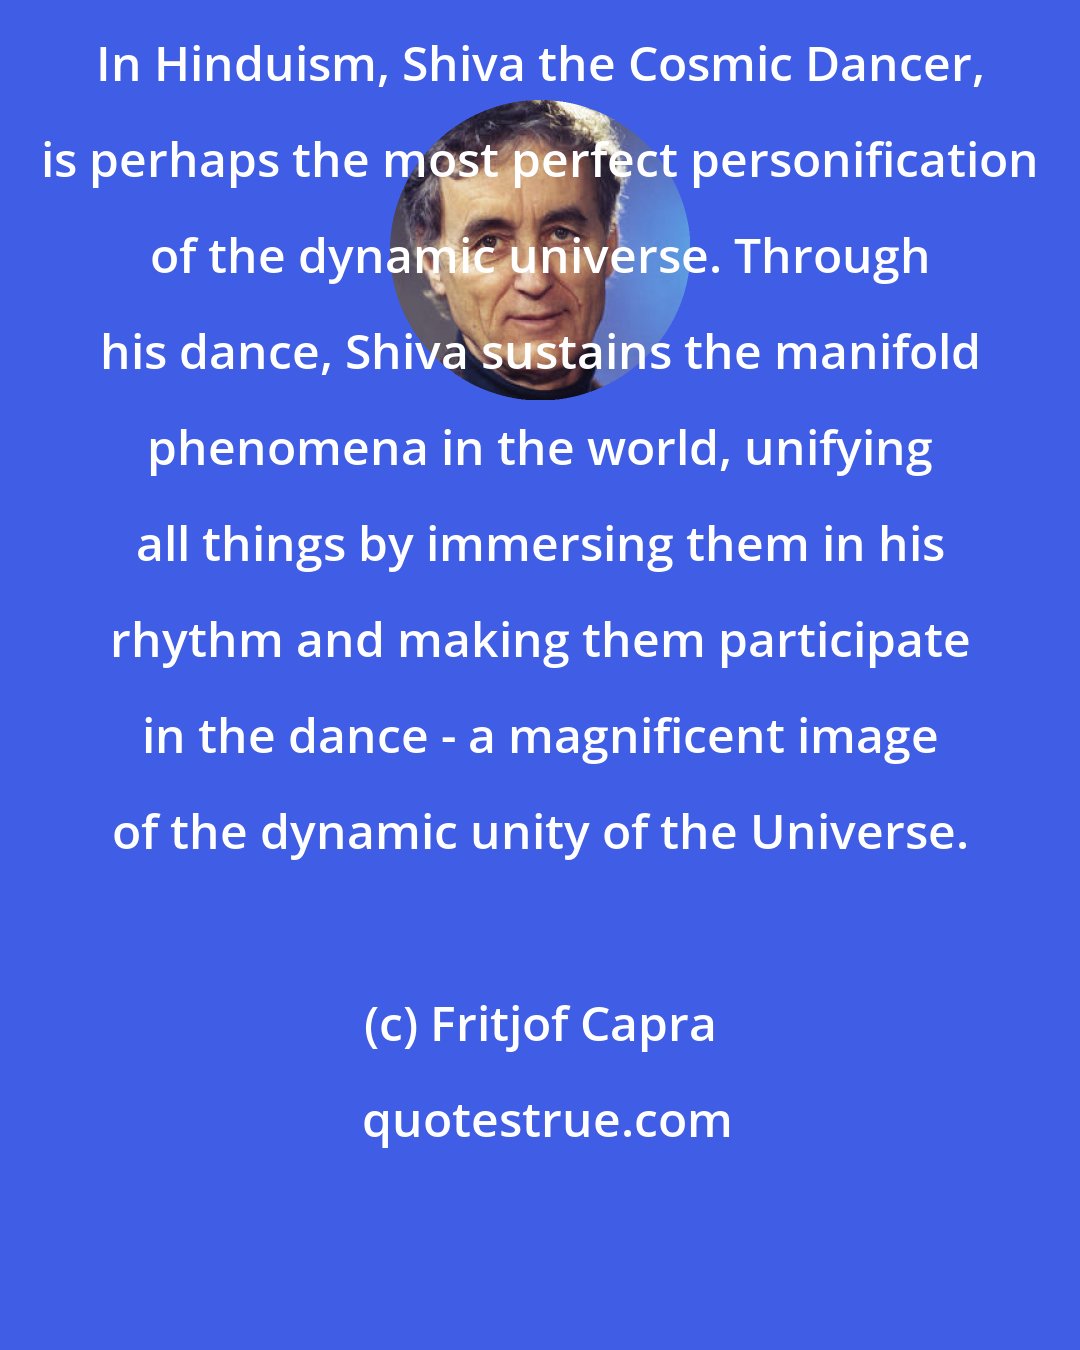 Fritjof Capra: In Hinduism, Shiva the Cosmic Dancer, is perhaps the most perfect personification of the dynamic universe. Through his dance, Shiva sustains the manifold phenomena in the world, unifying all things by immersing them in his rhythm and making them participate in the dance - a magnificent image of the dynamic unity of the Universe.